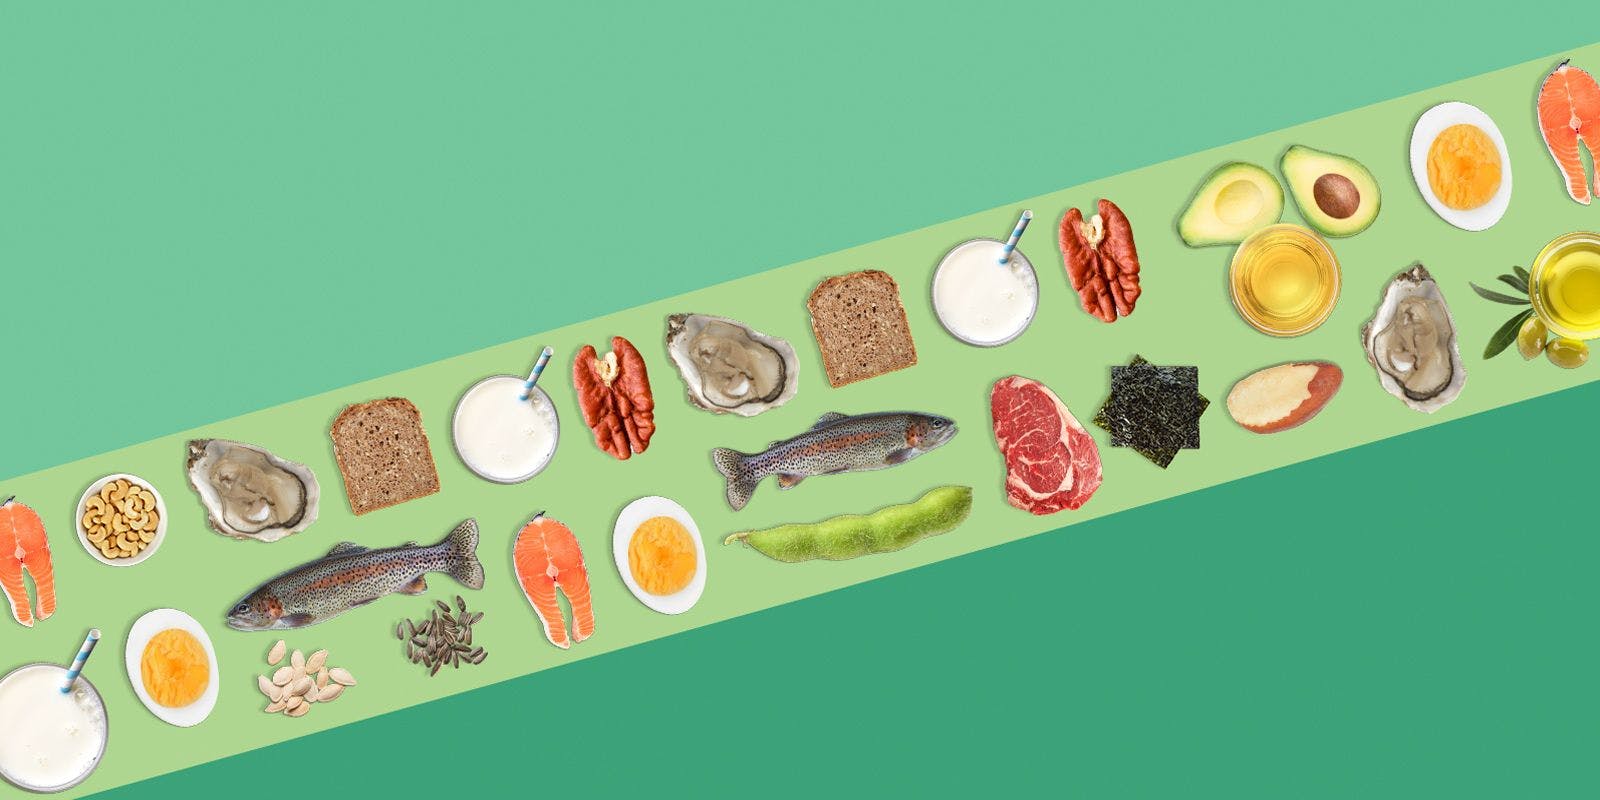 A graphic of omega-rich beans, fish, milk, bread, eggs and seeds.